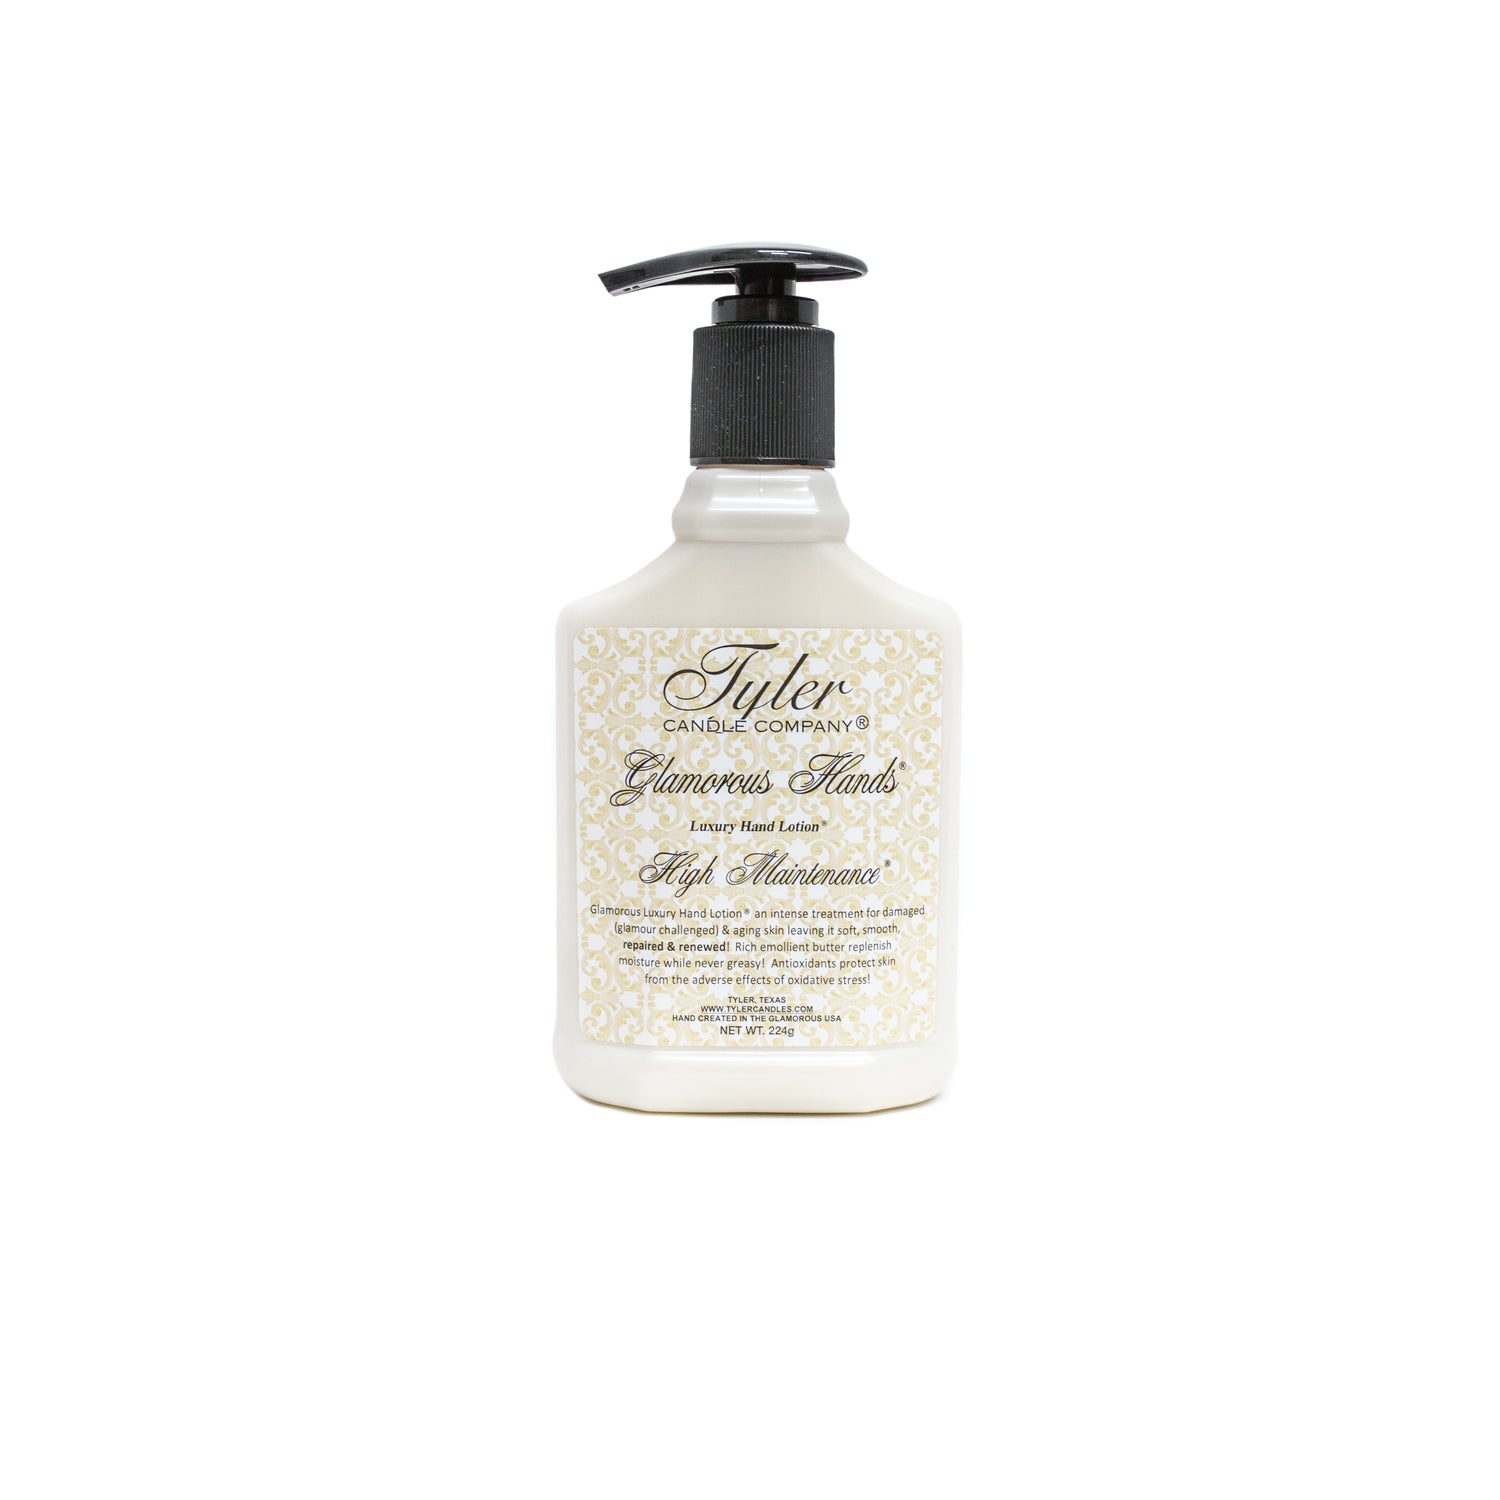 Tyler Candles - Glamorous Luxury Hand Lotion Bath & Body in  at Wrapsody